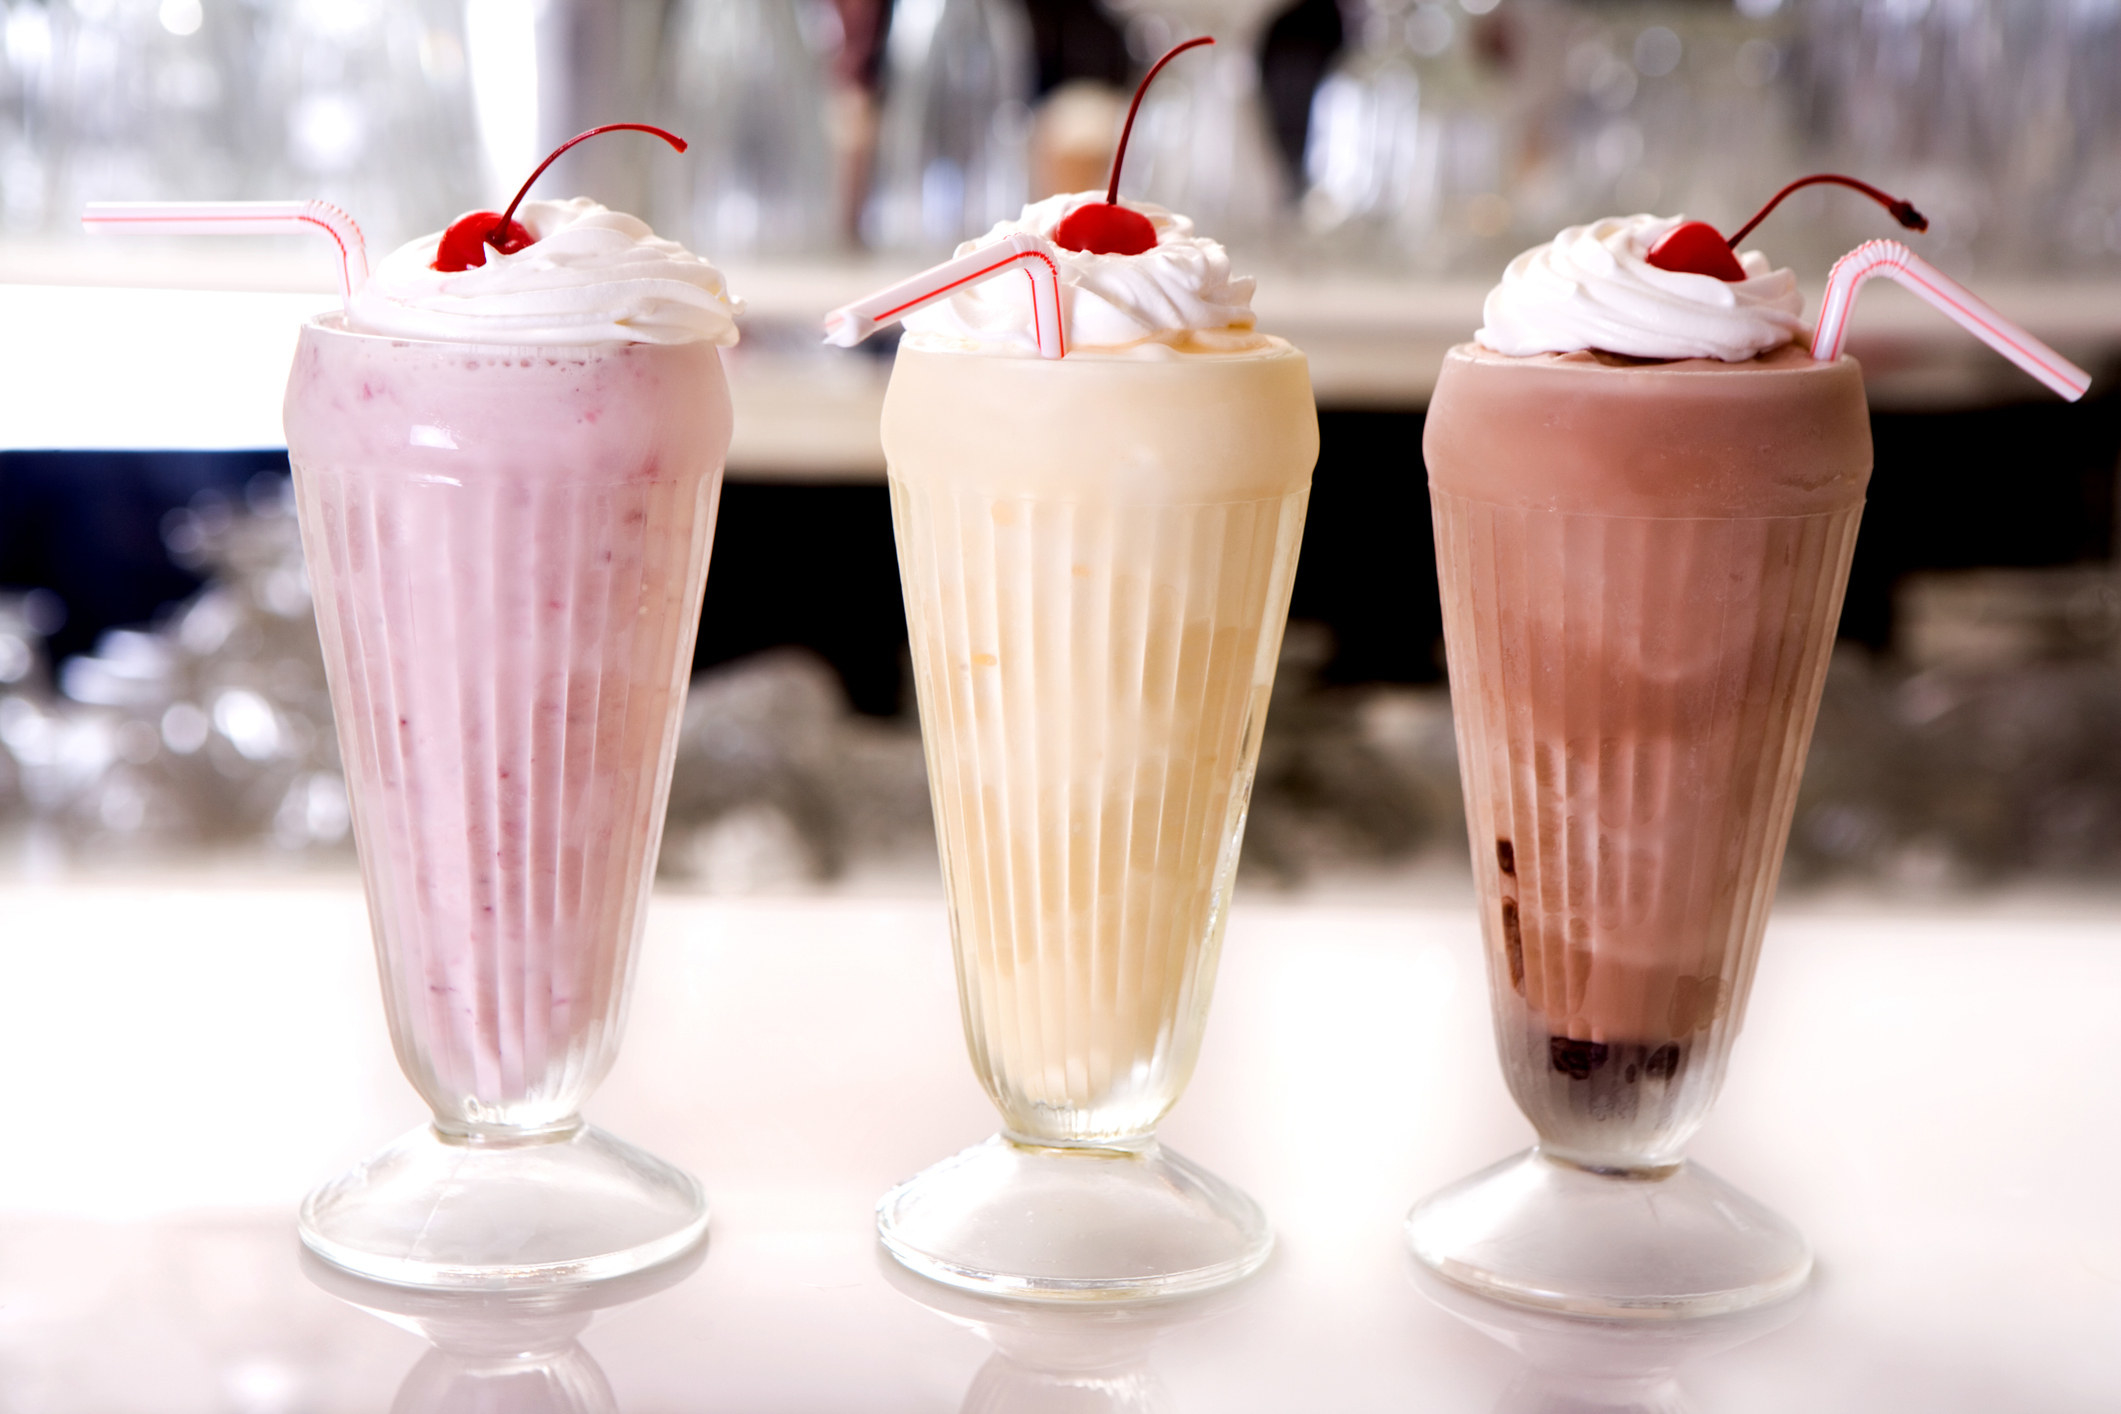 Cups of different flavored milkshakes.